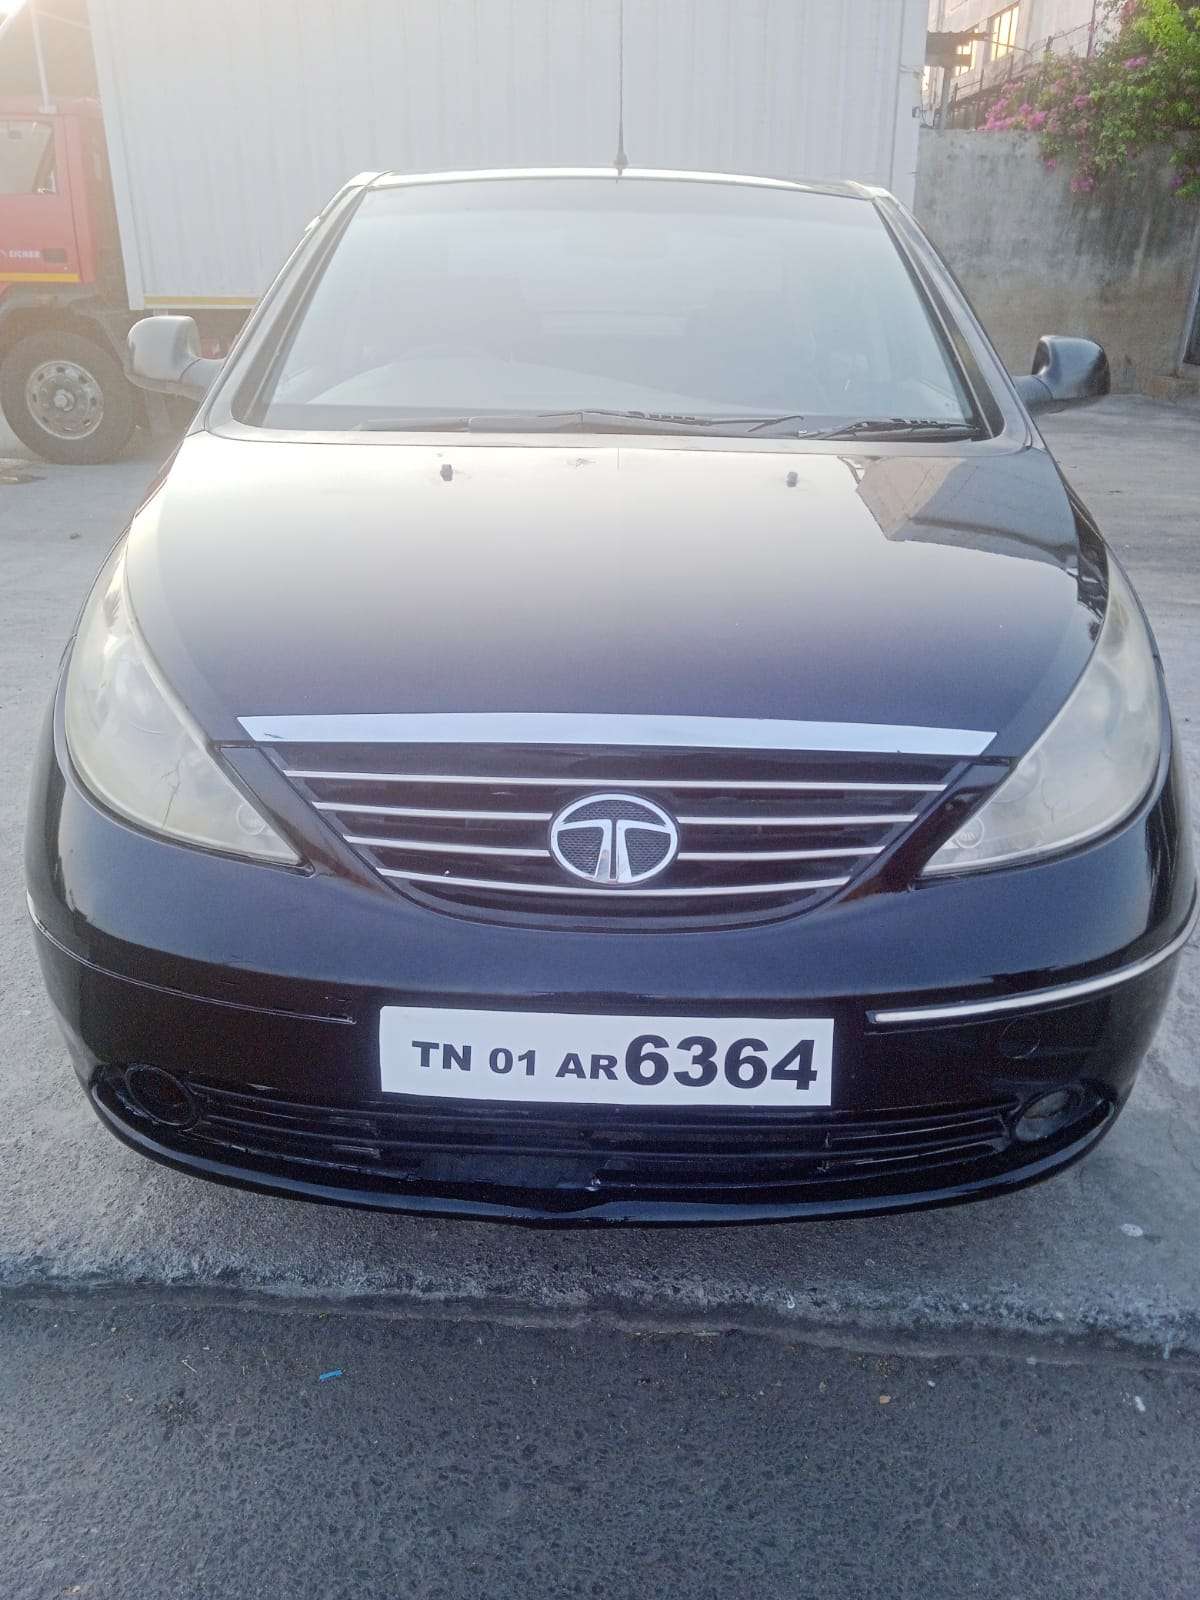 2716-for-sale-Tata-Motors-Manza-Diesel-First-Owner-2012-TN-registered-rs-180000